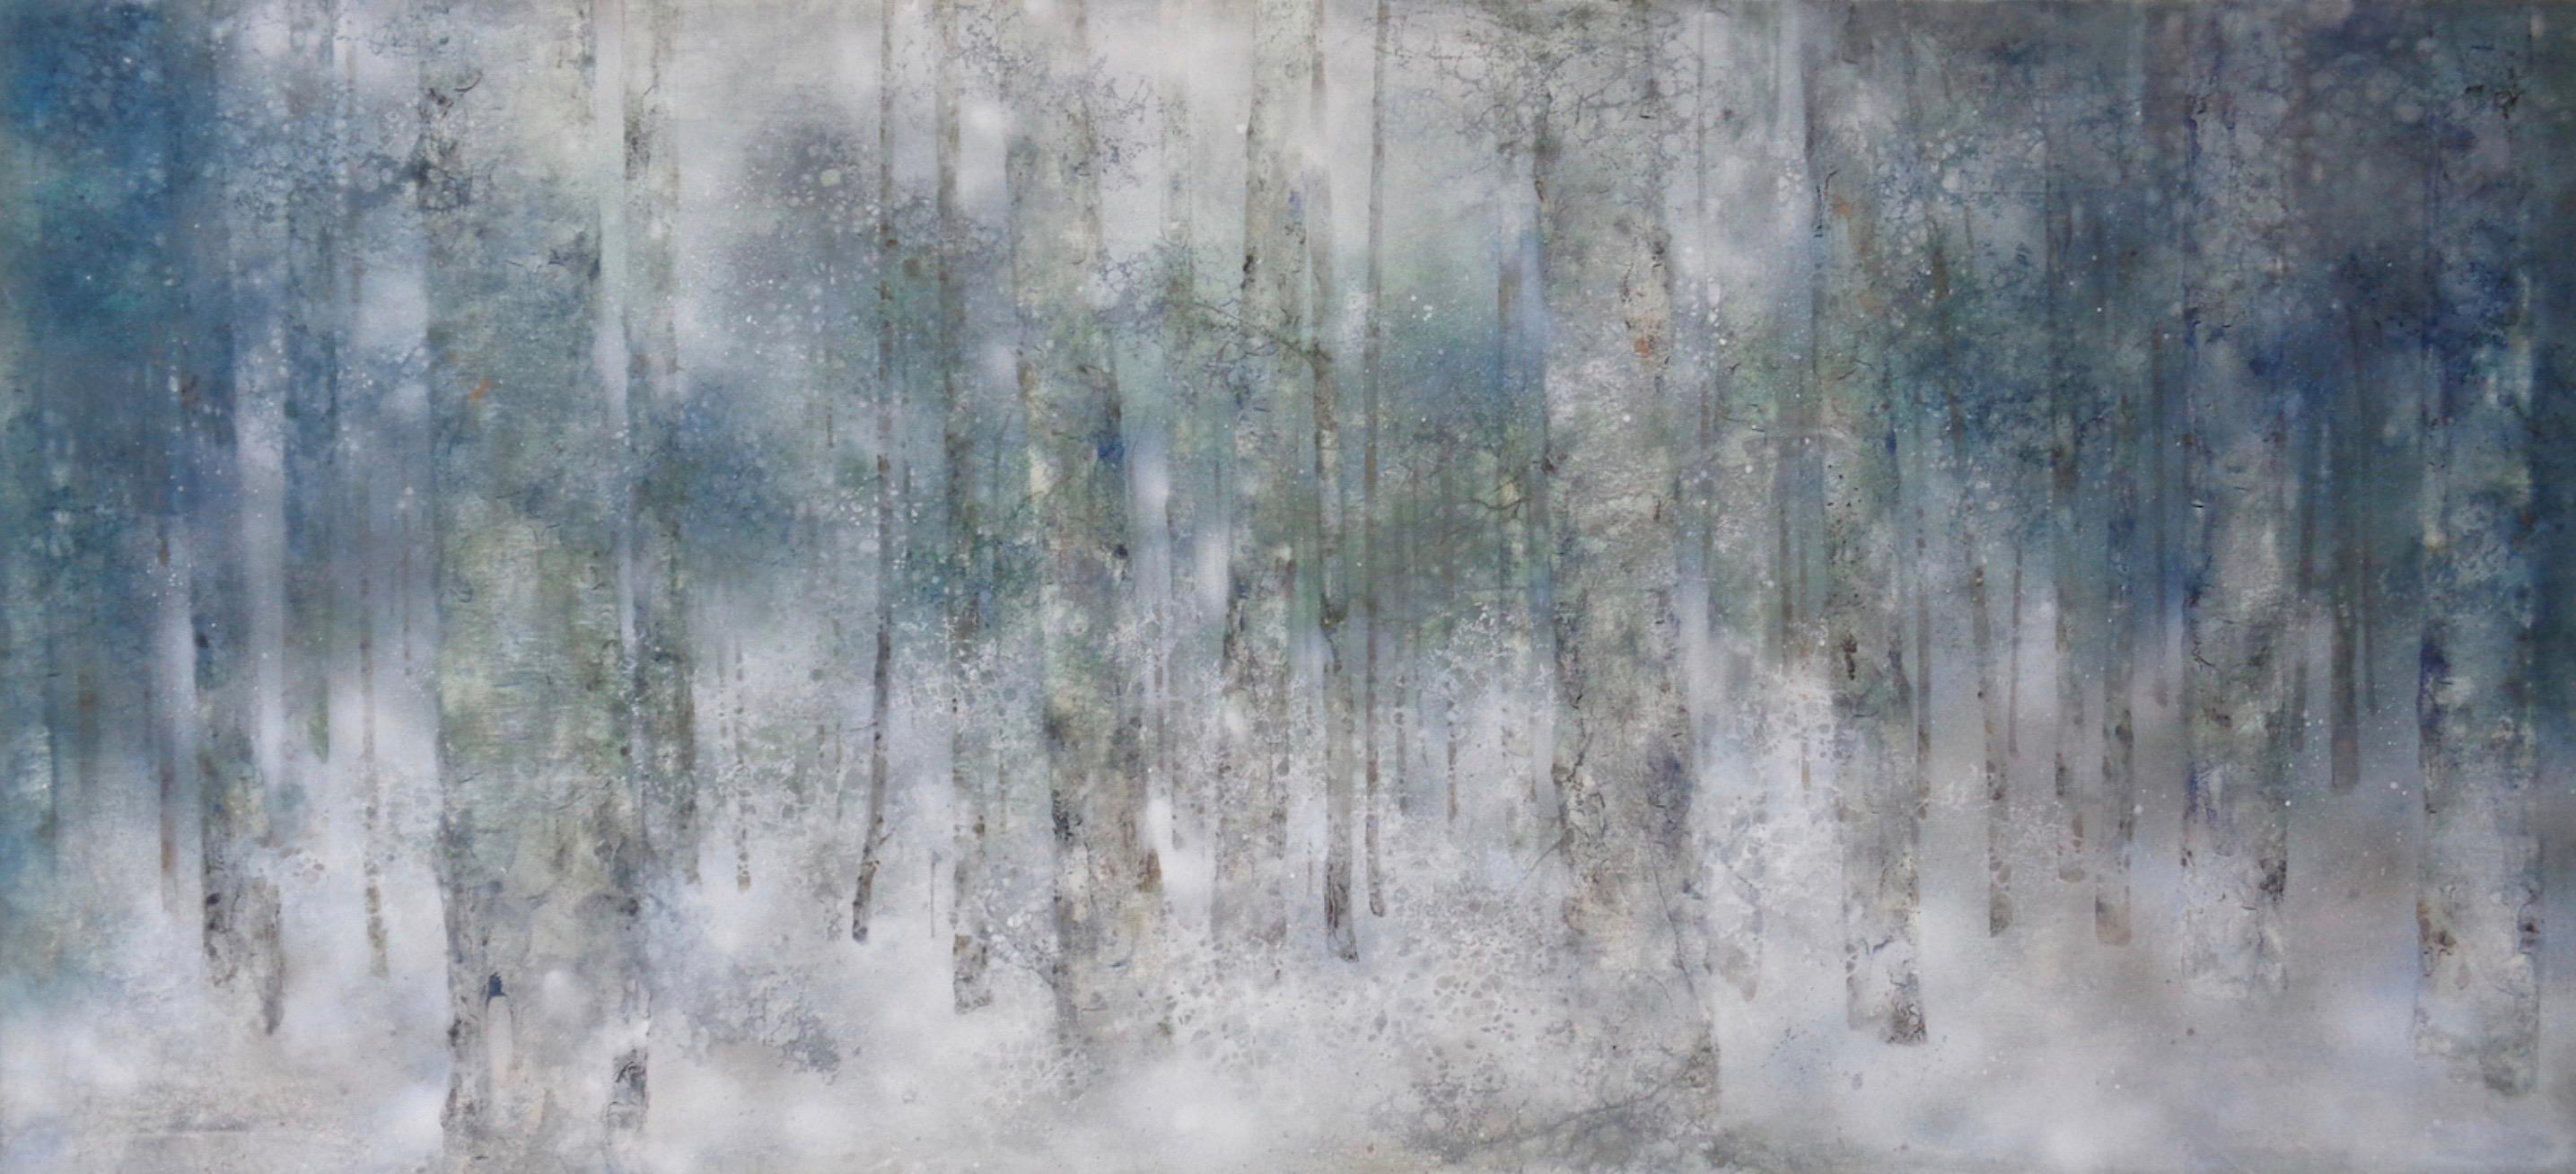 Yiching Chen Figurative Painting - Plenitude II by CHEN Yiching - Nihonga landscape painting, forest